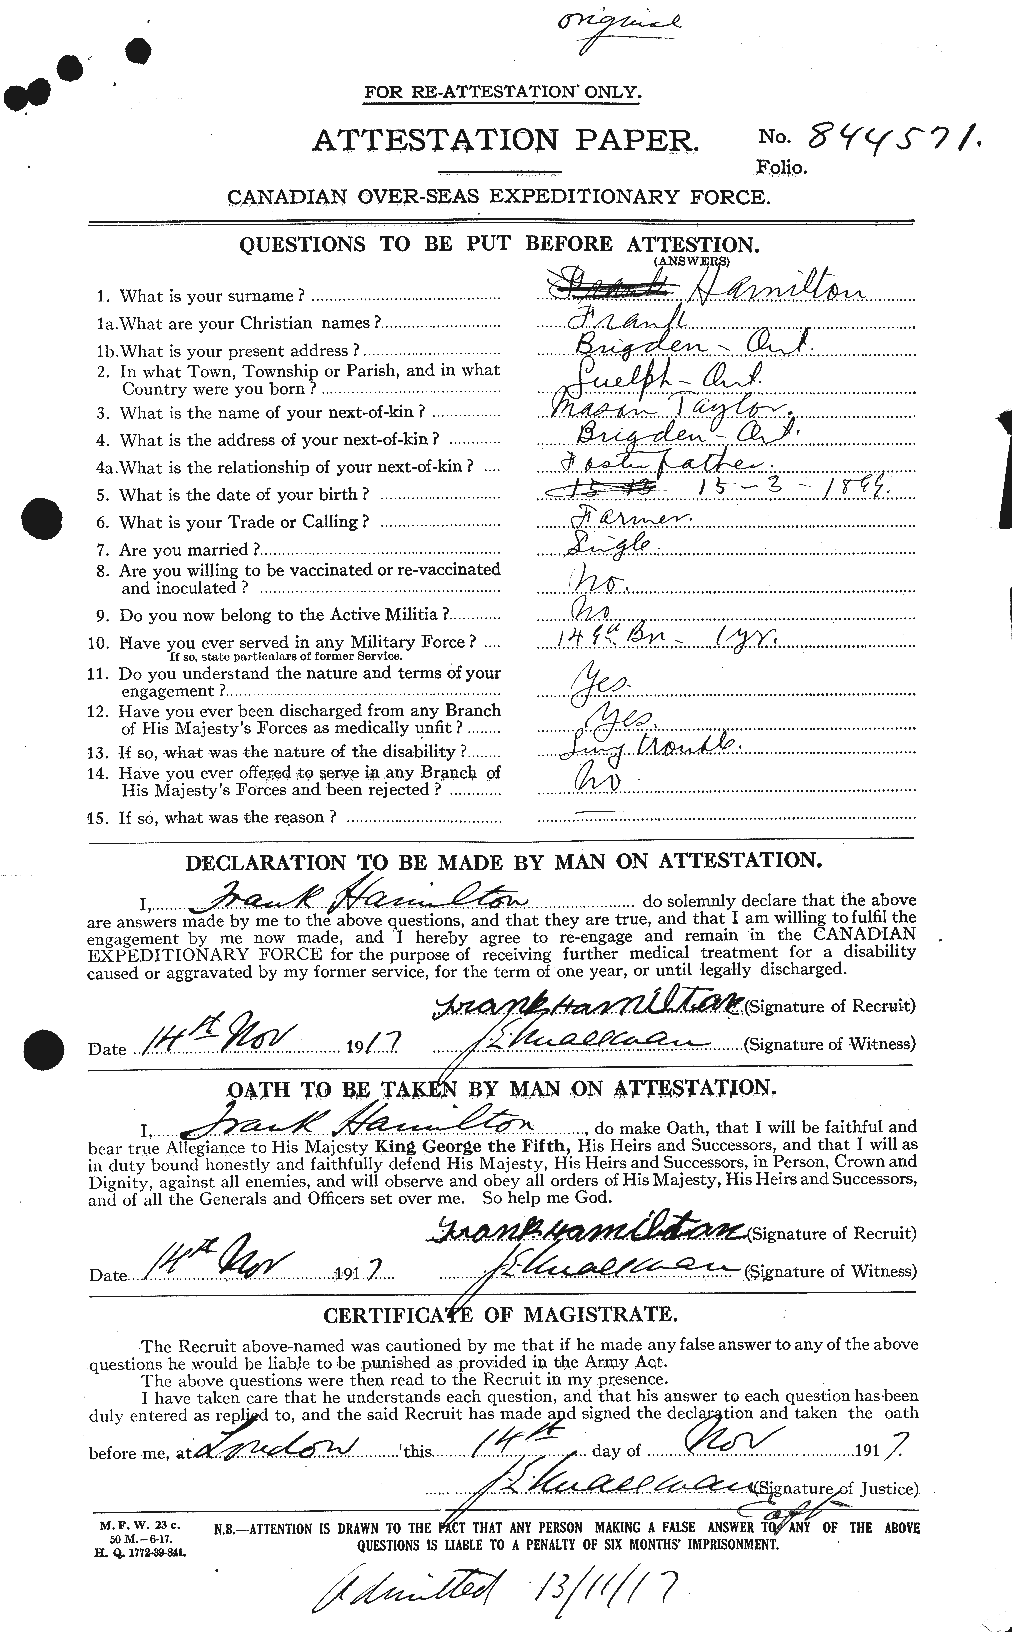 Personnel Records of the First World War - CEF 372389a